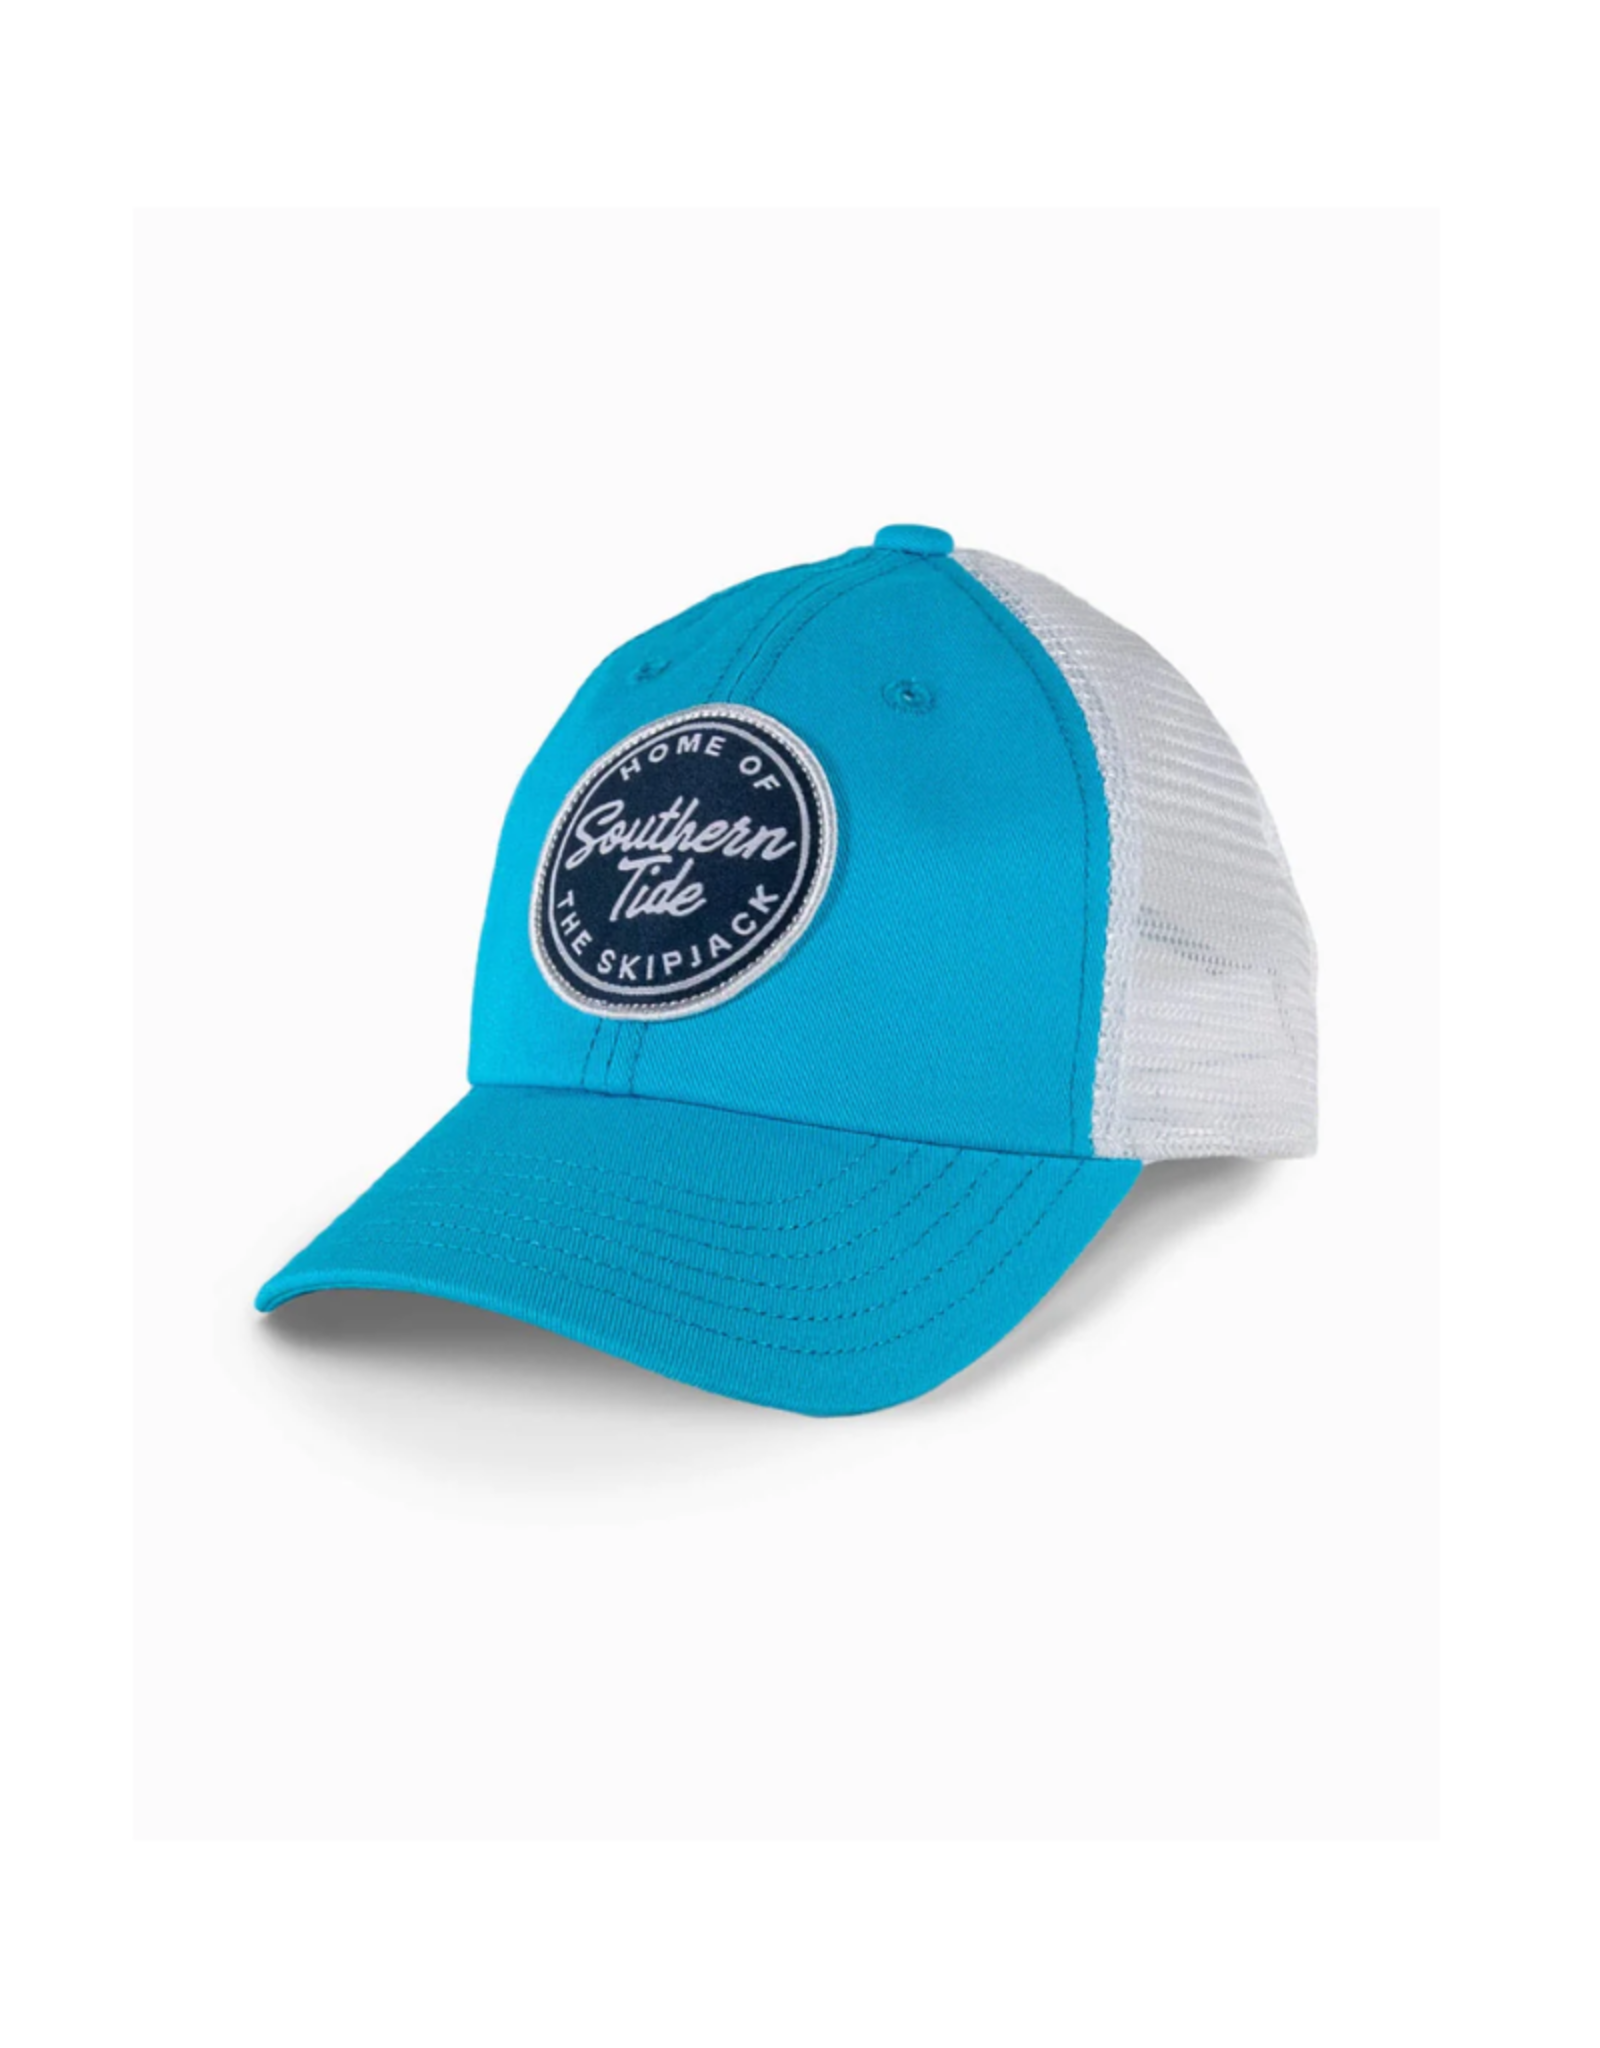 Southern Tide Home of the SJ Patch Trucker Hat